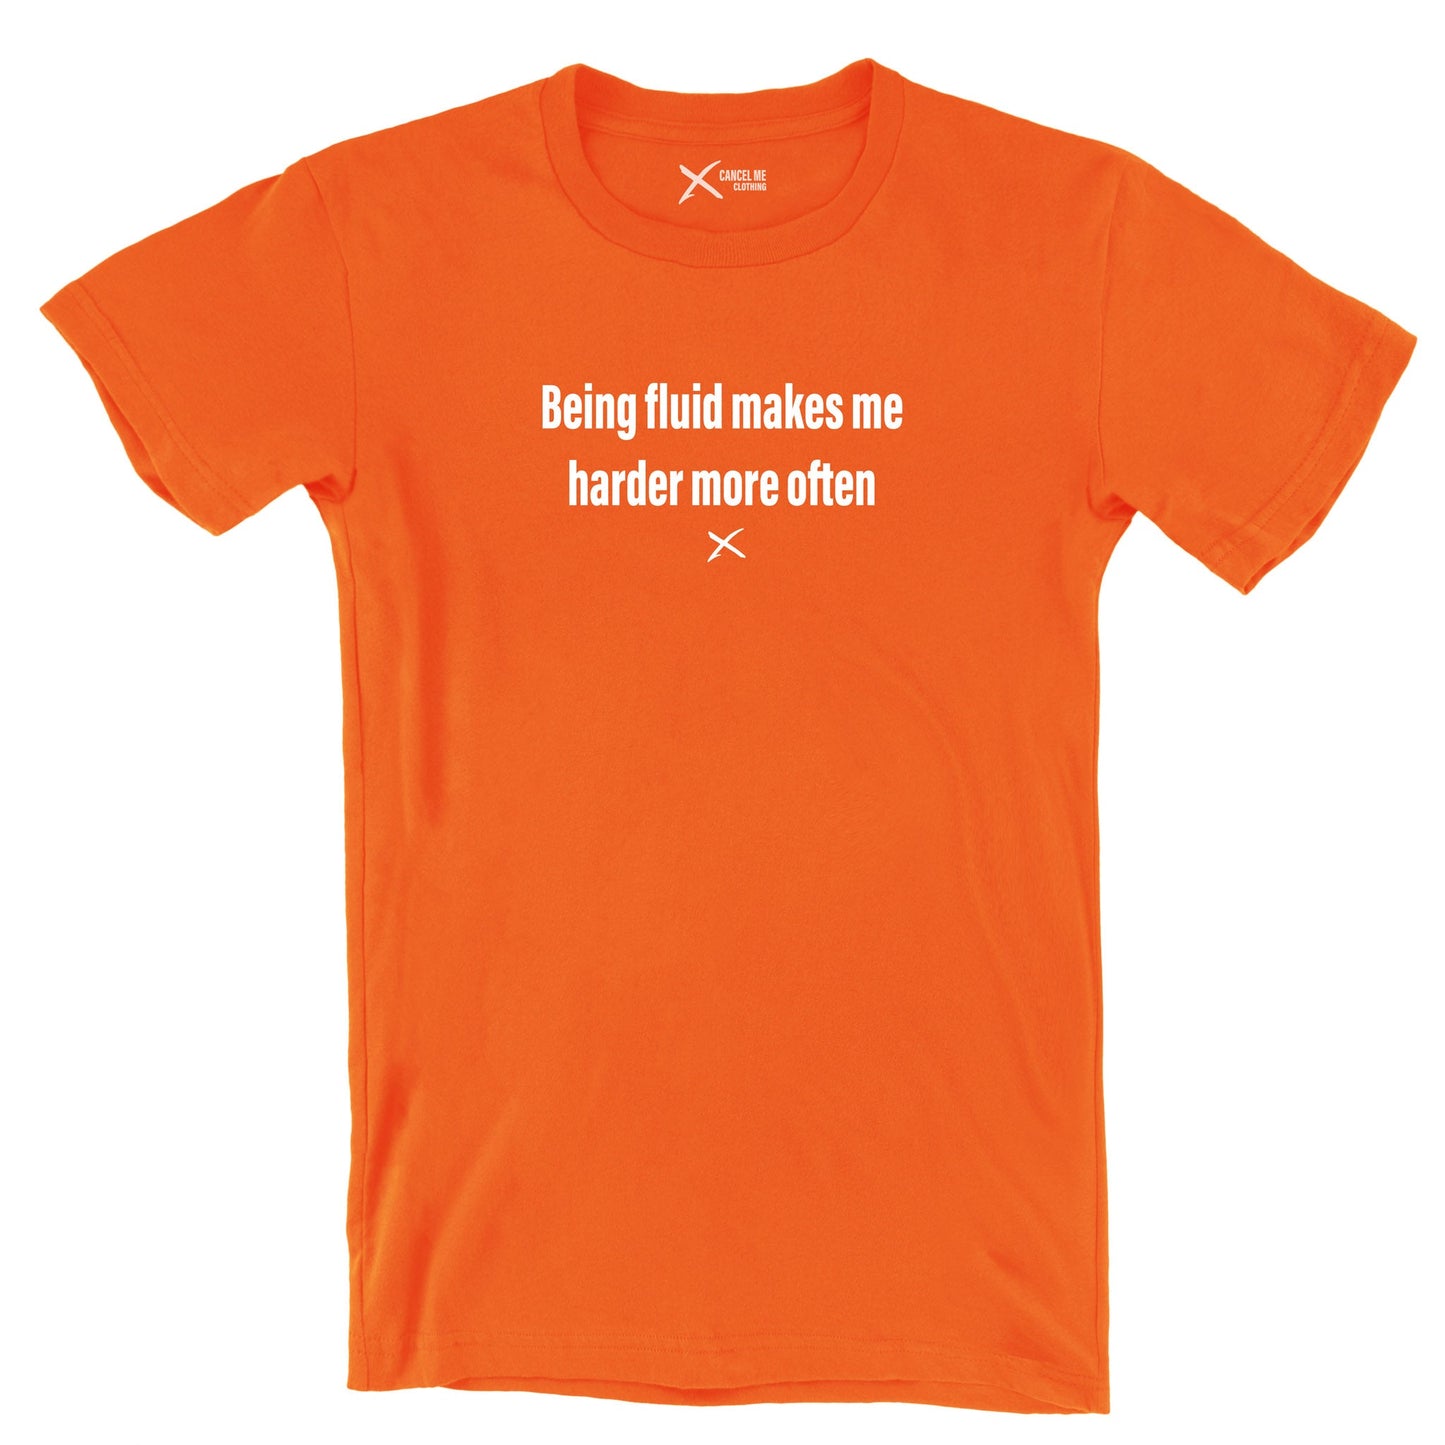 Being fluid makes me harder more often - Shirt